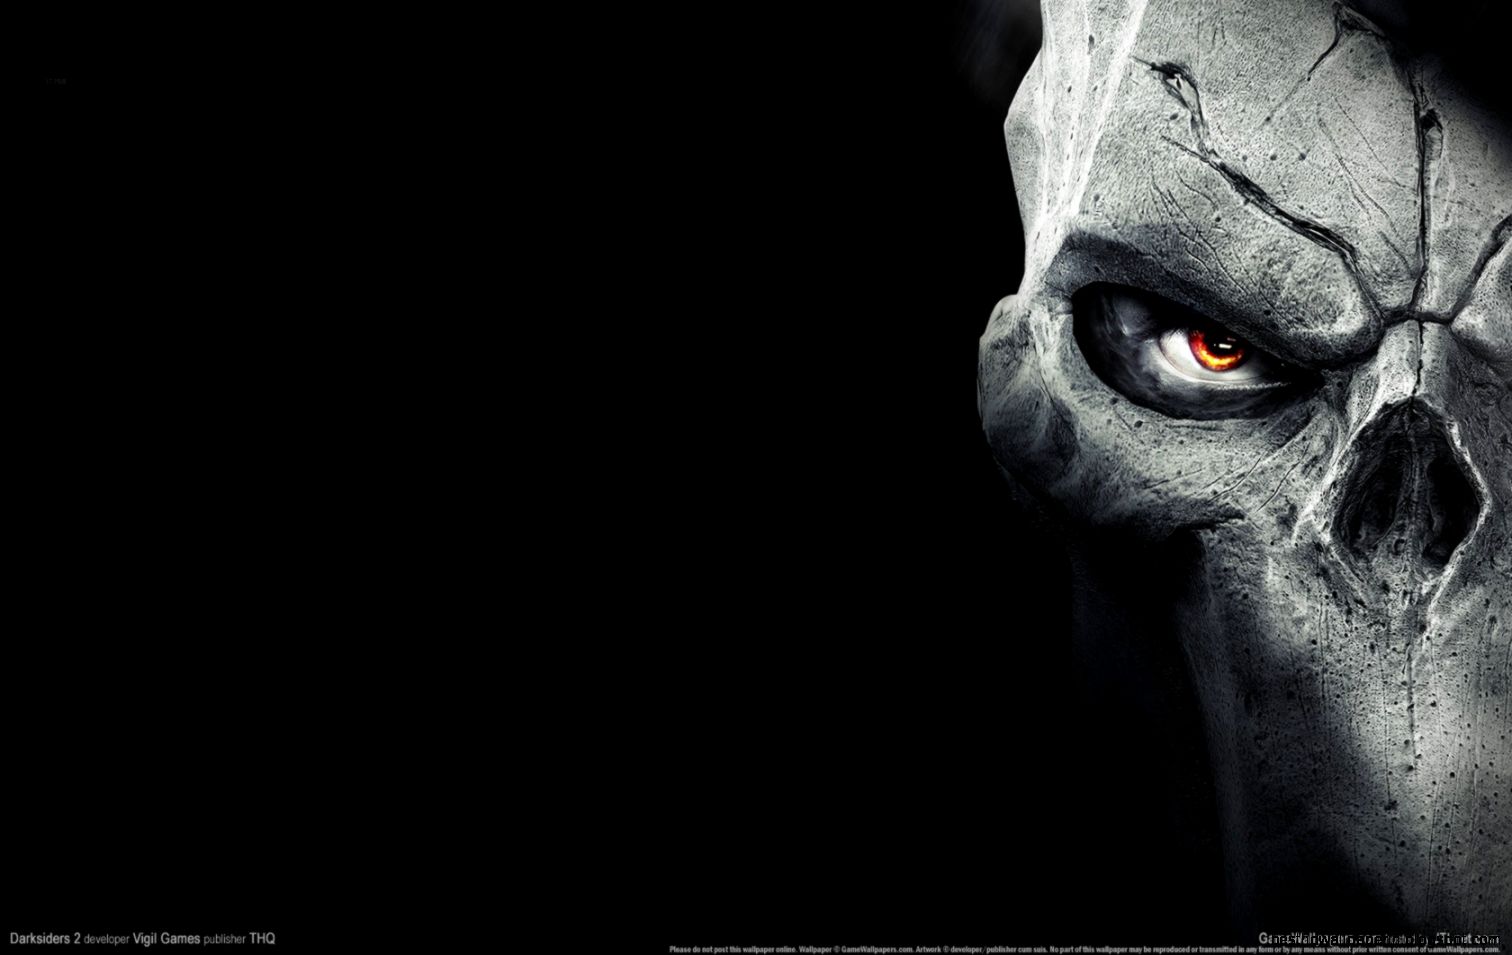 Game Pictures Darksiders 2 Wallpaper Hd 1080p Widescreen Best Hd Images, Photos, Reviews